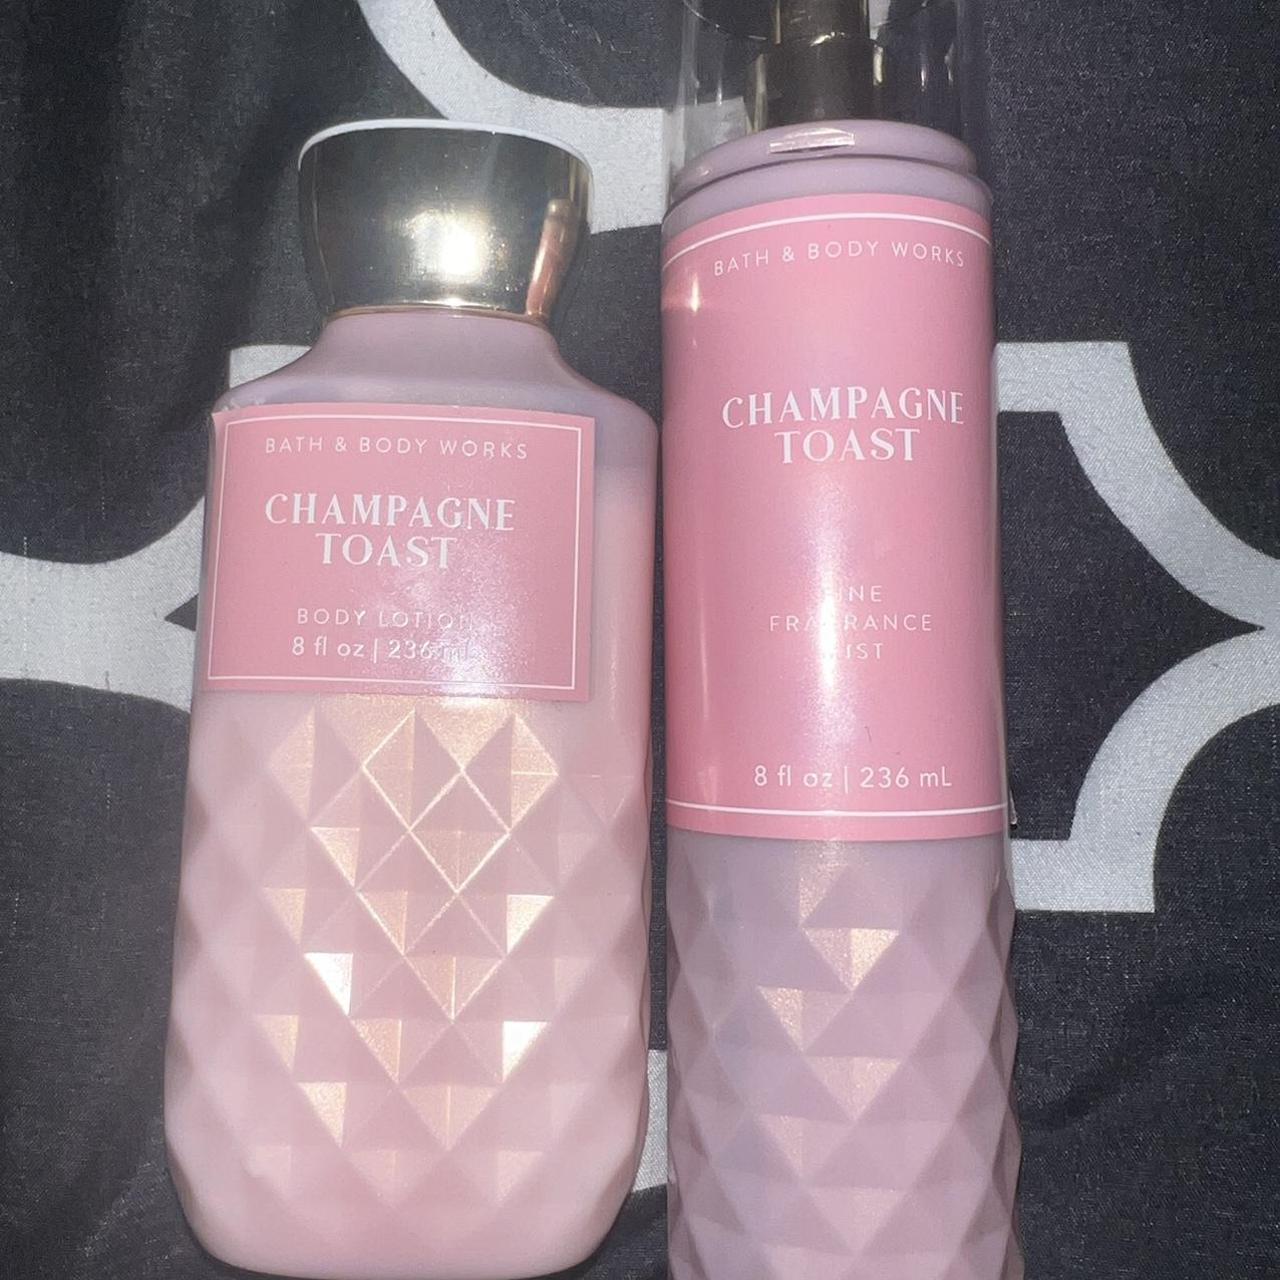 Champagne toast body lotion - Bath and Body Works - 236ml